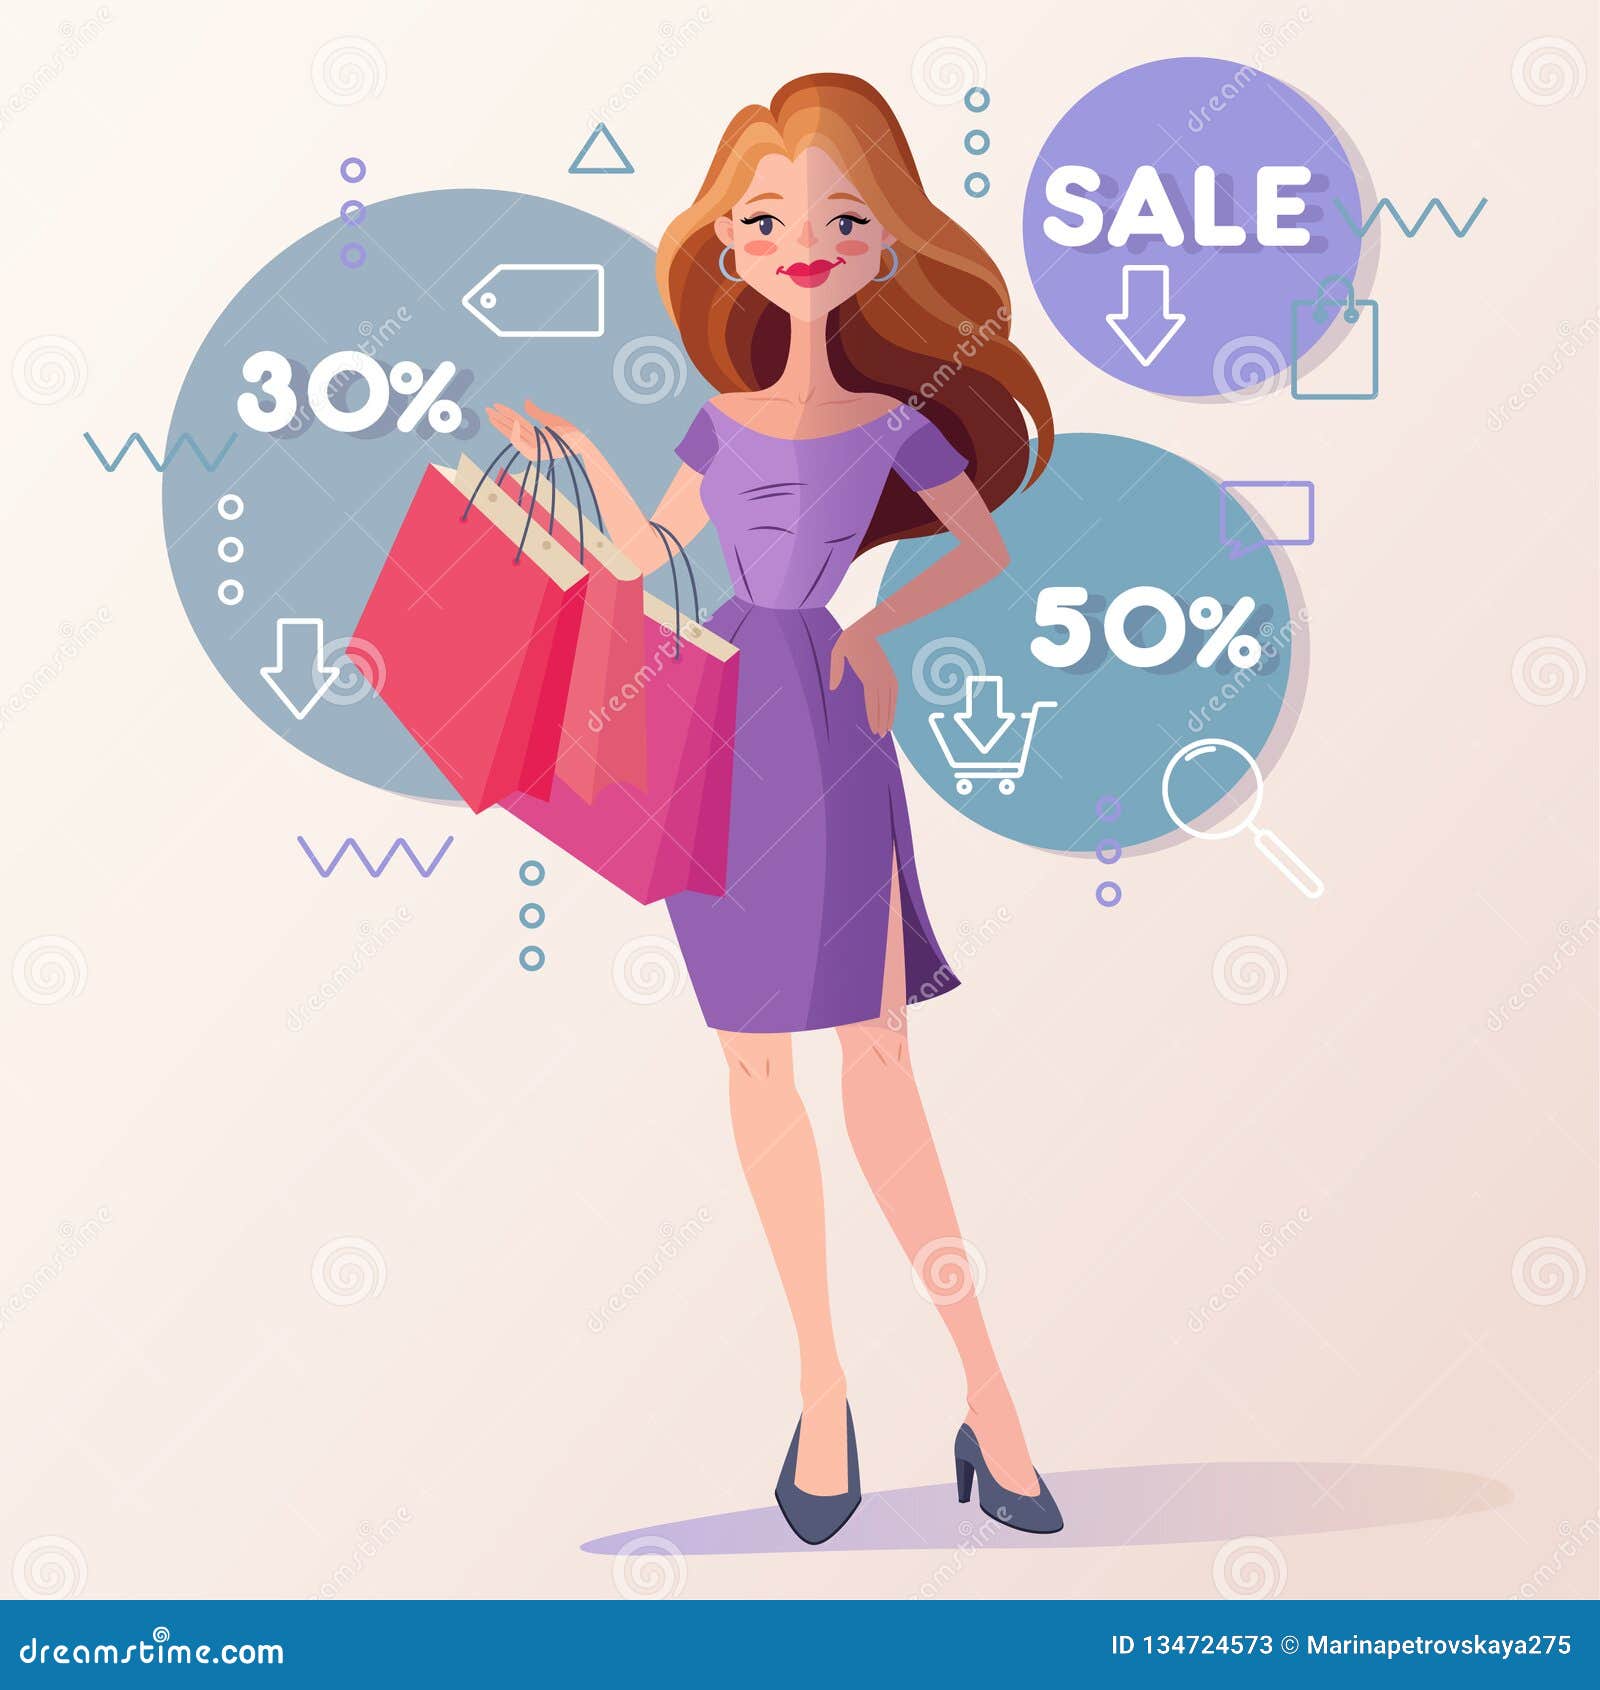 Vector Illustration Including Icons on Shopping and Sale Theme. Stock ...